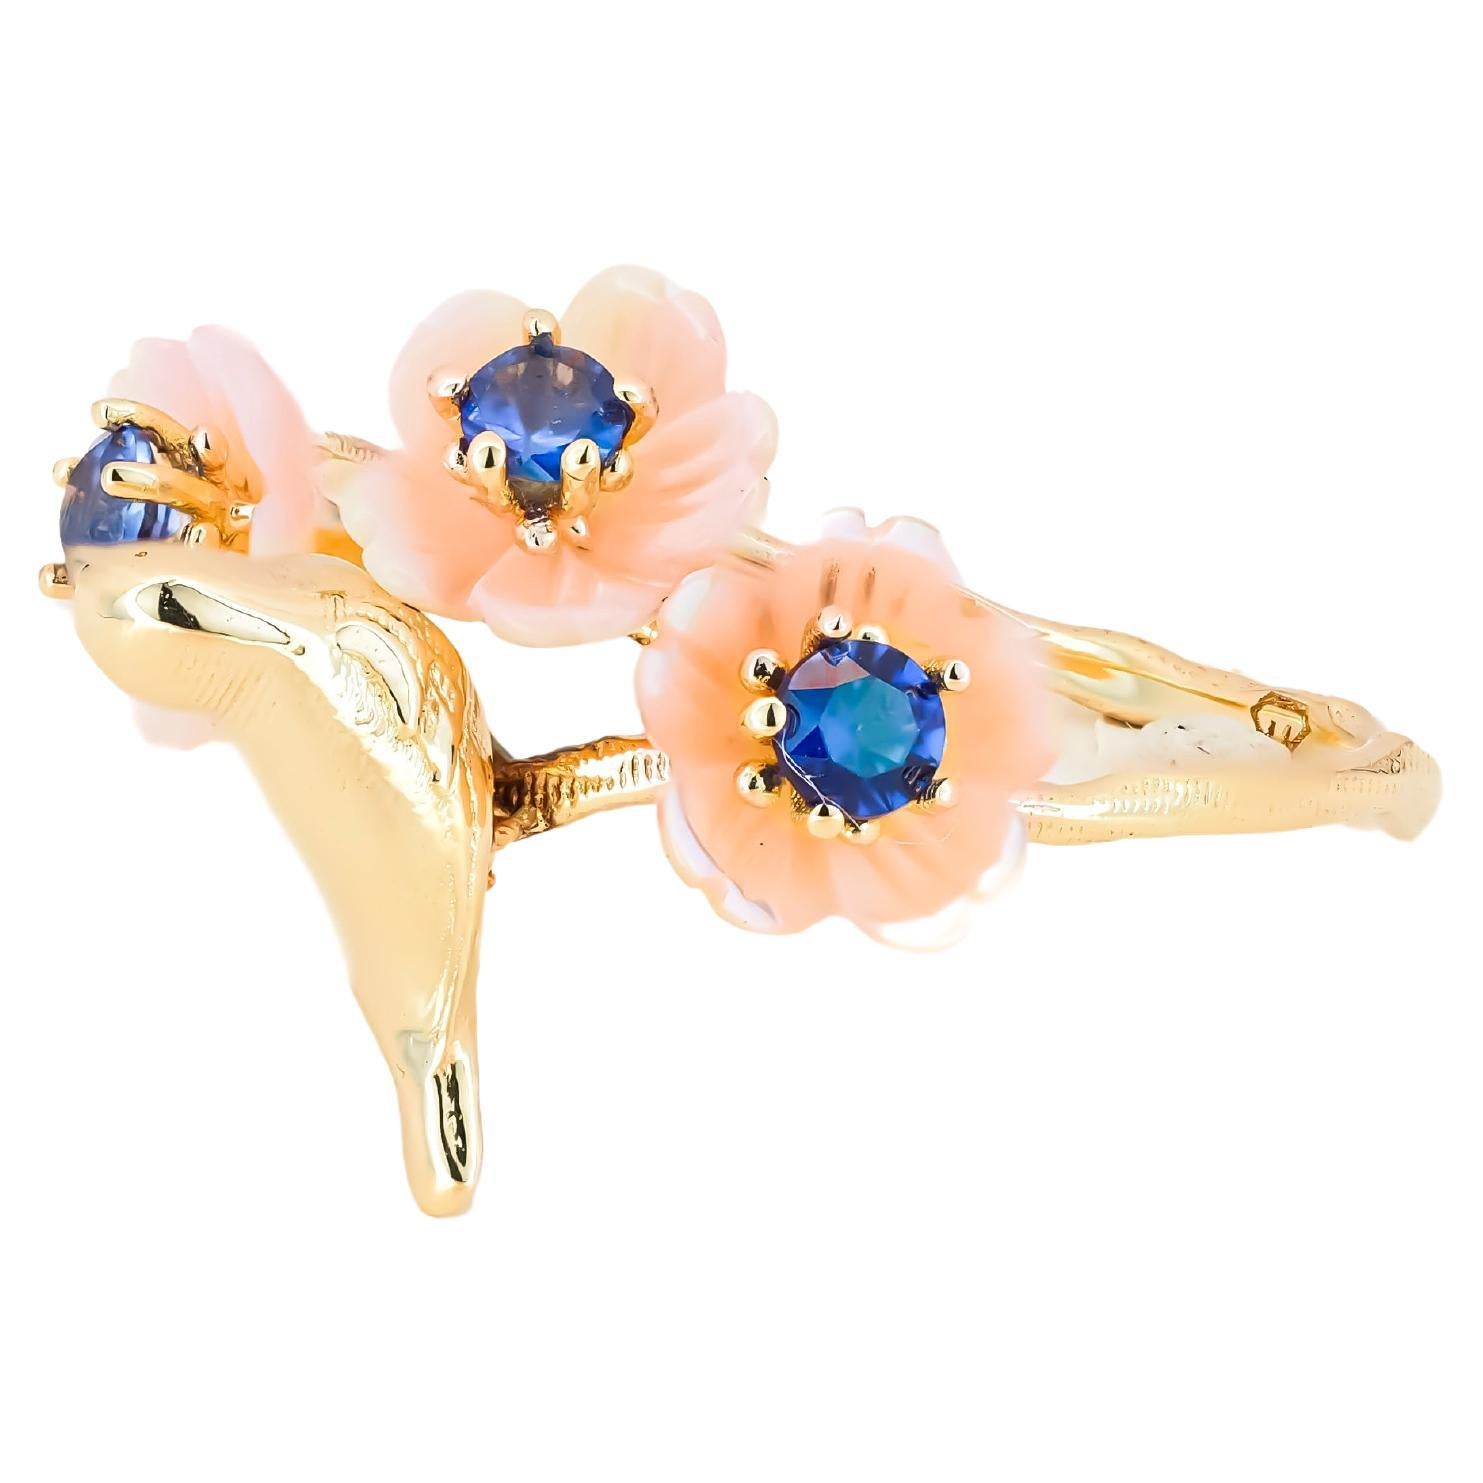 For Sale:  14k Gold Bird on Branch Ring. Sapphires and Carved Mother of Pearl ring! 7